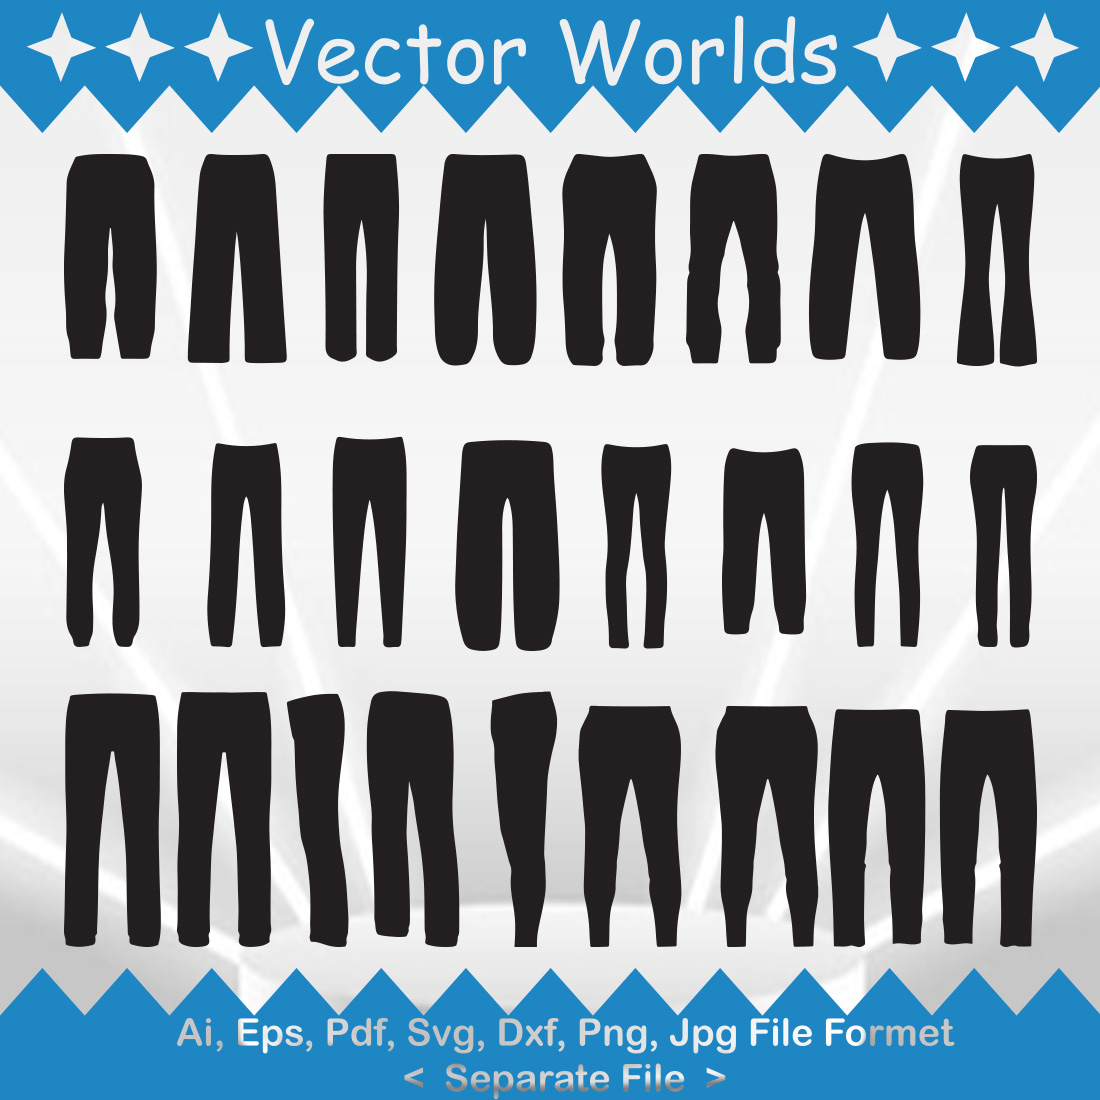 Set of vector elegant images of full pants silhouettes.